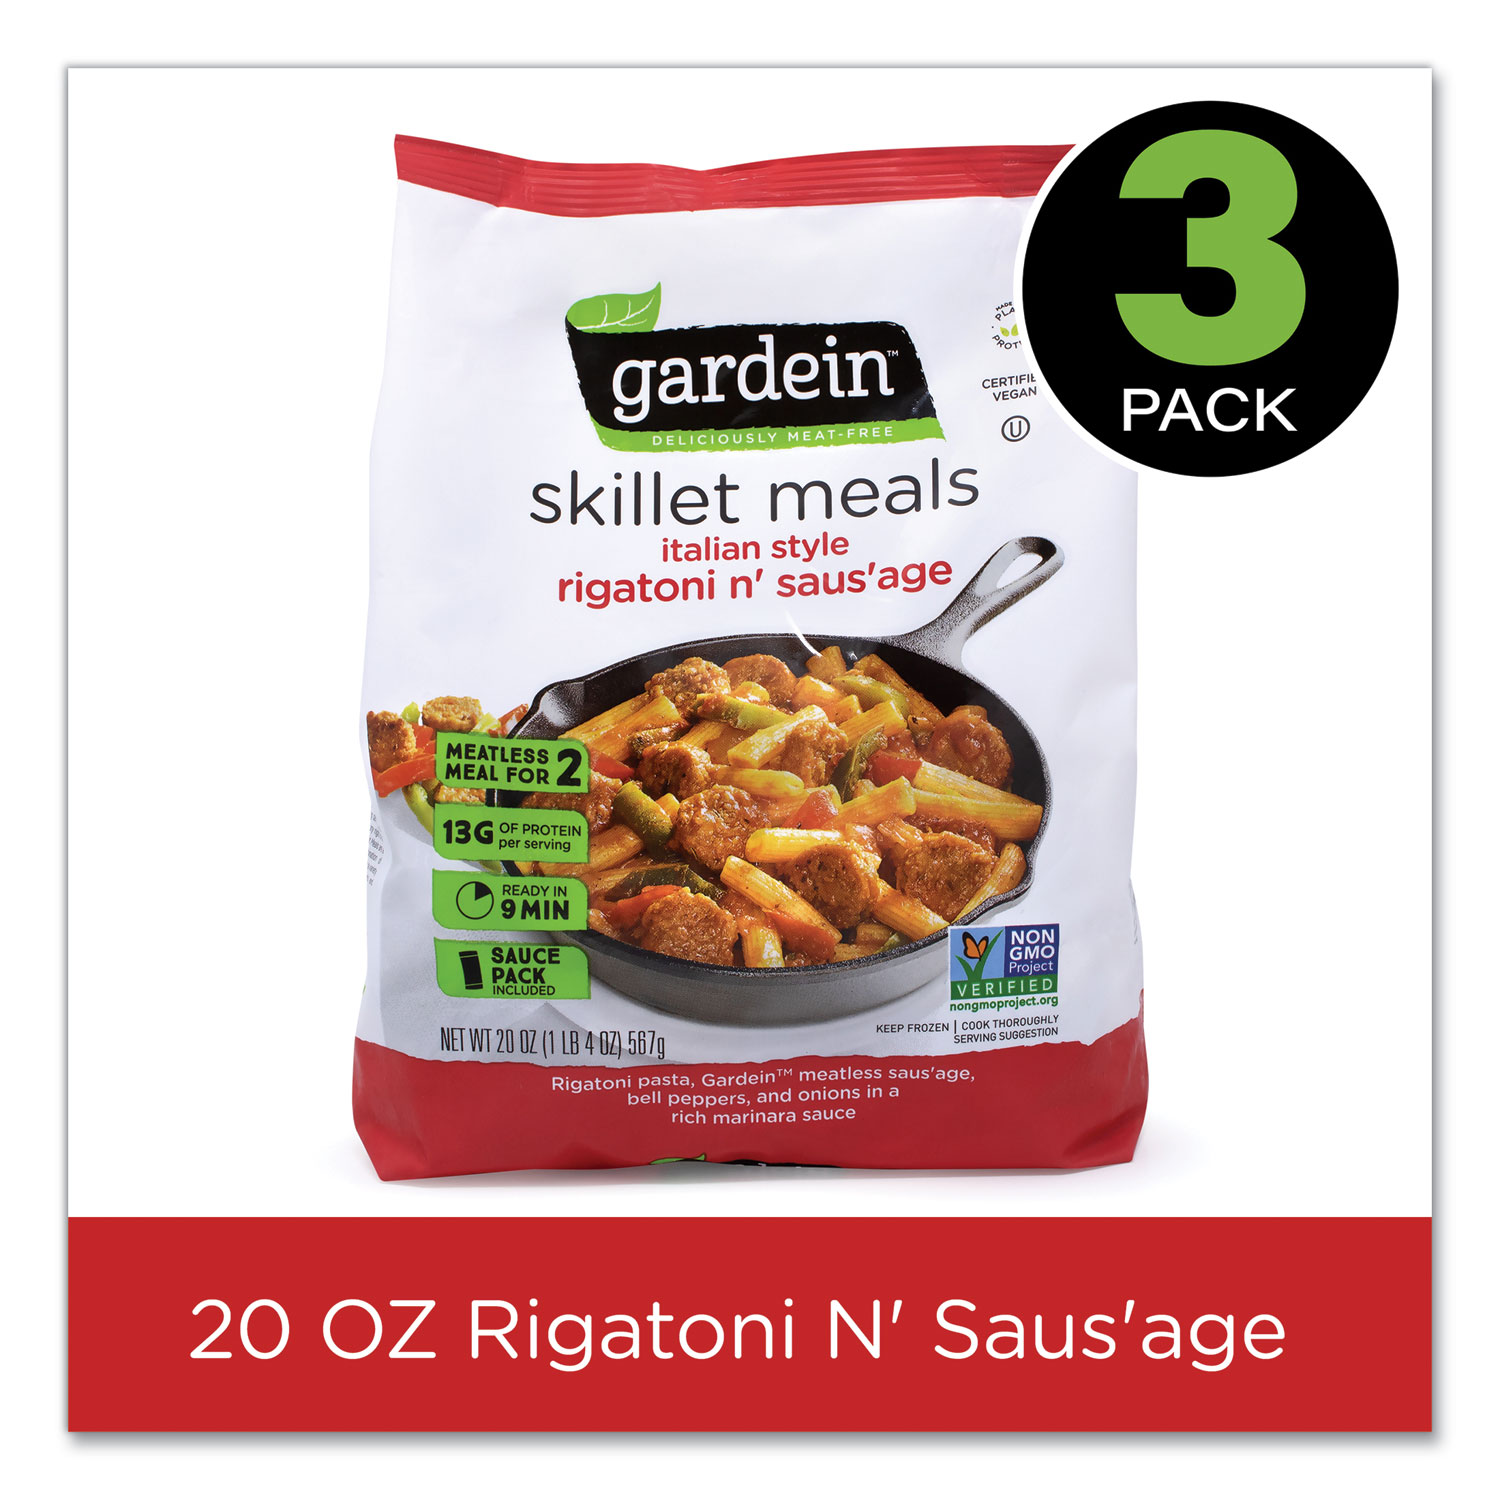  gardein 4223400219 Skillet Meal Italian Sausage Pasta, 20 oz Bag, 3/Pack, Free Delivery in 1-4 Business Days (GRR90300158) 